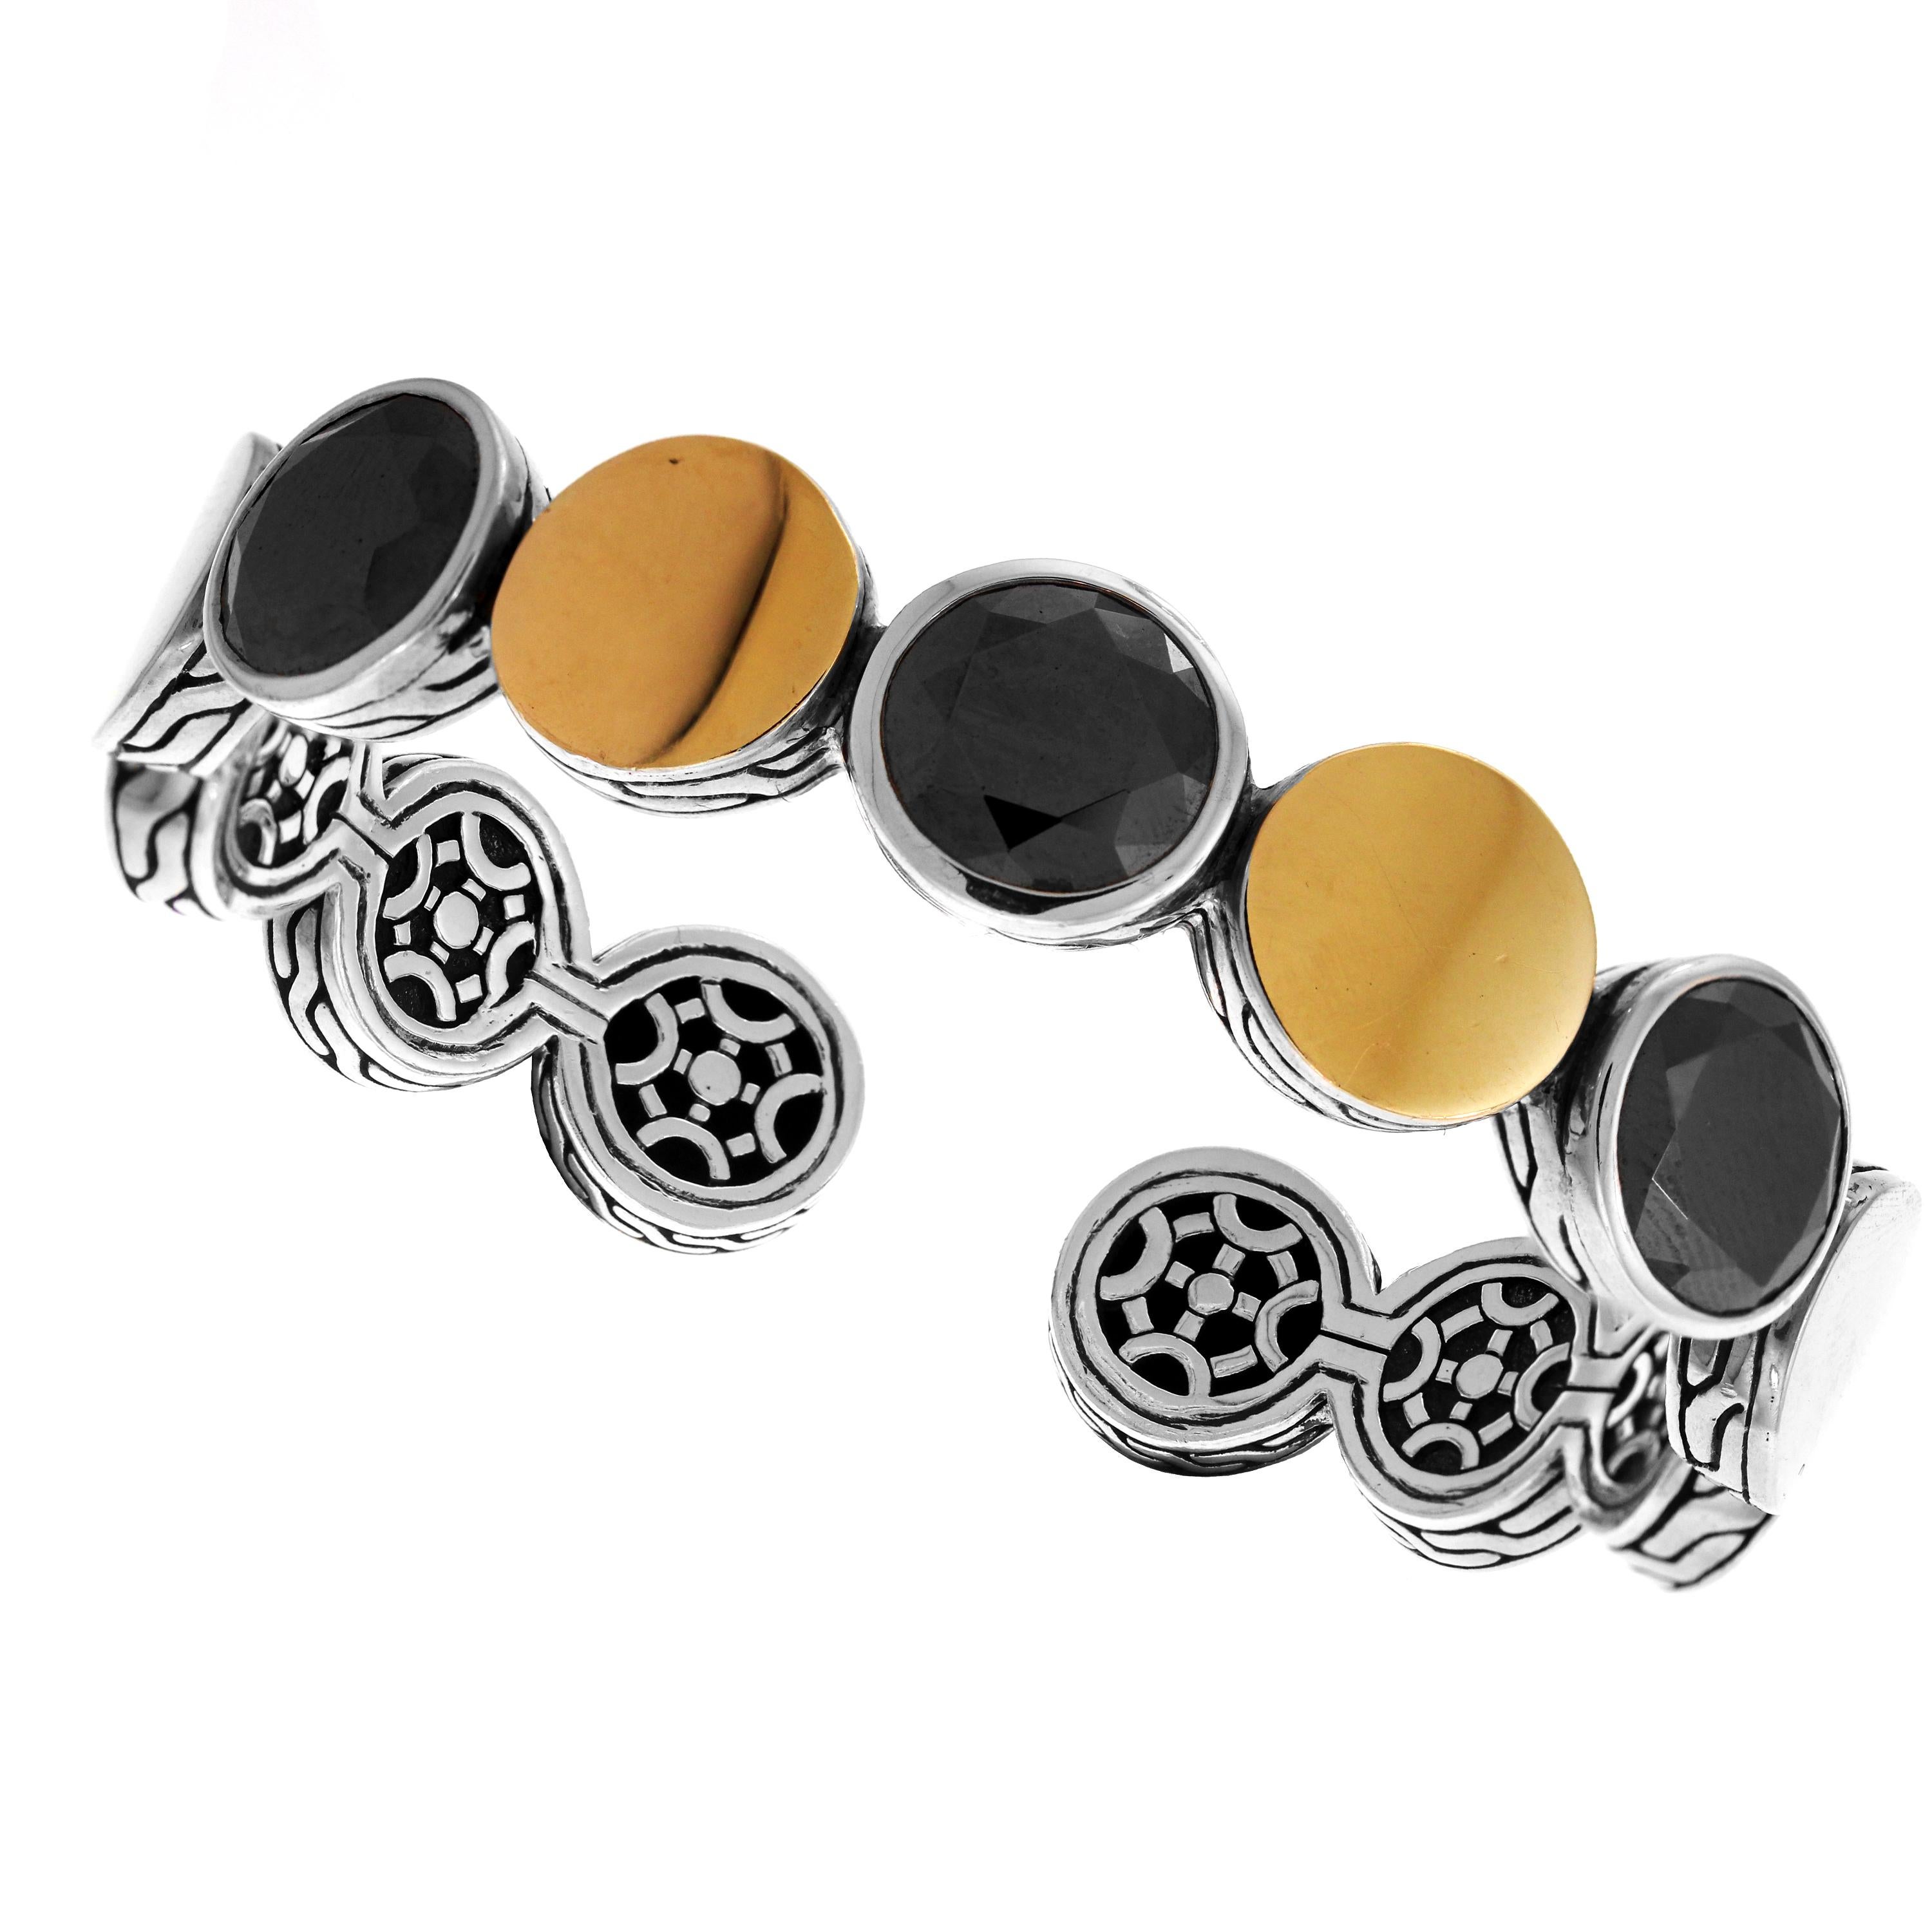 IF YOU ARE REALLY INTERESTED, CONTACT US WITH ANY REASONABLE OFFER. WE WILL TRY OUR BEST TO MAKE YOU HAPPY!

John Hardy Stackable 18K Yellow Gold and Sterling Silver Cuff Bracelet Set with Black Spinel

Bracelet measures 0.5 inch in width

Bracelet